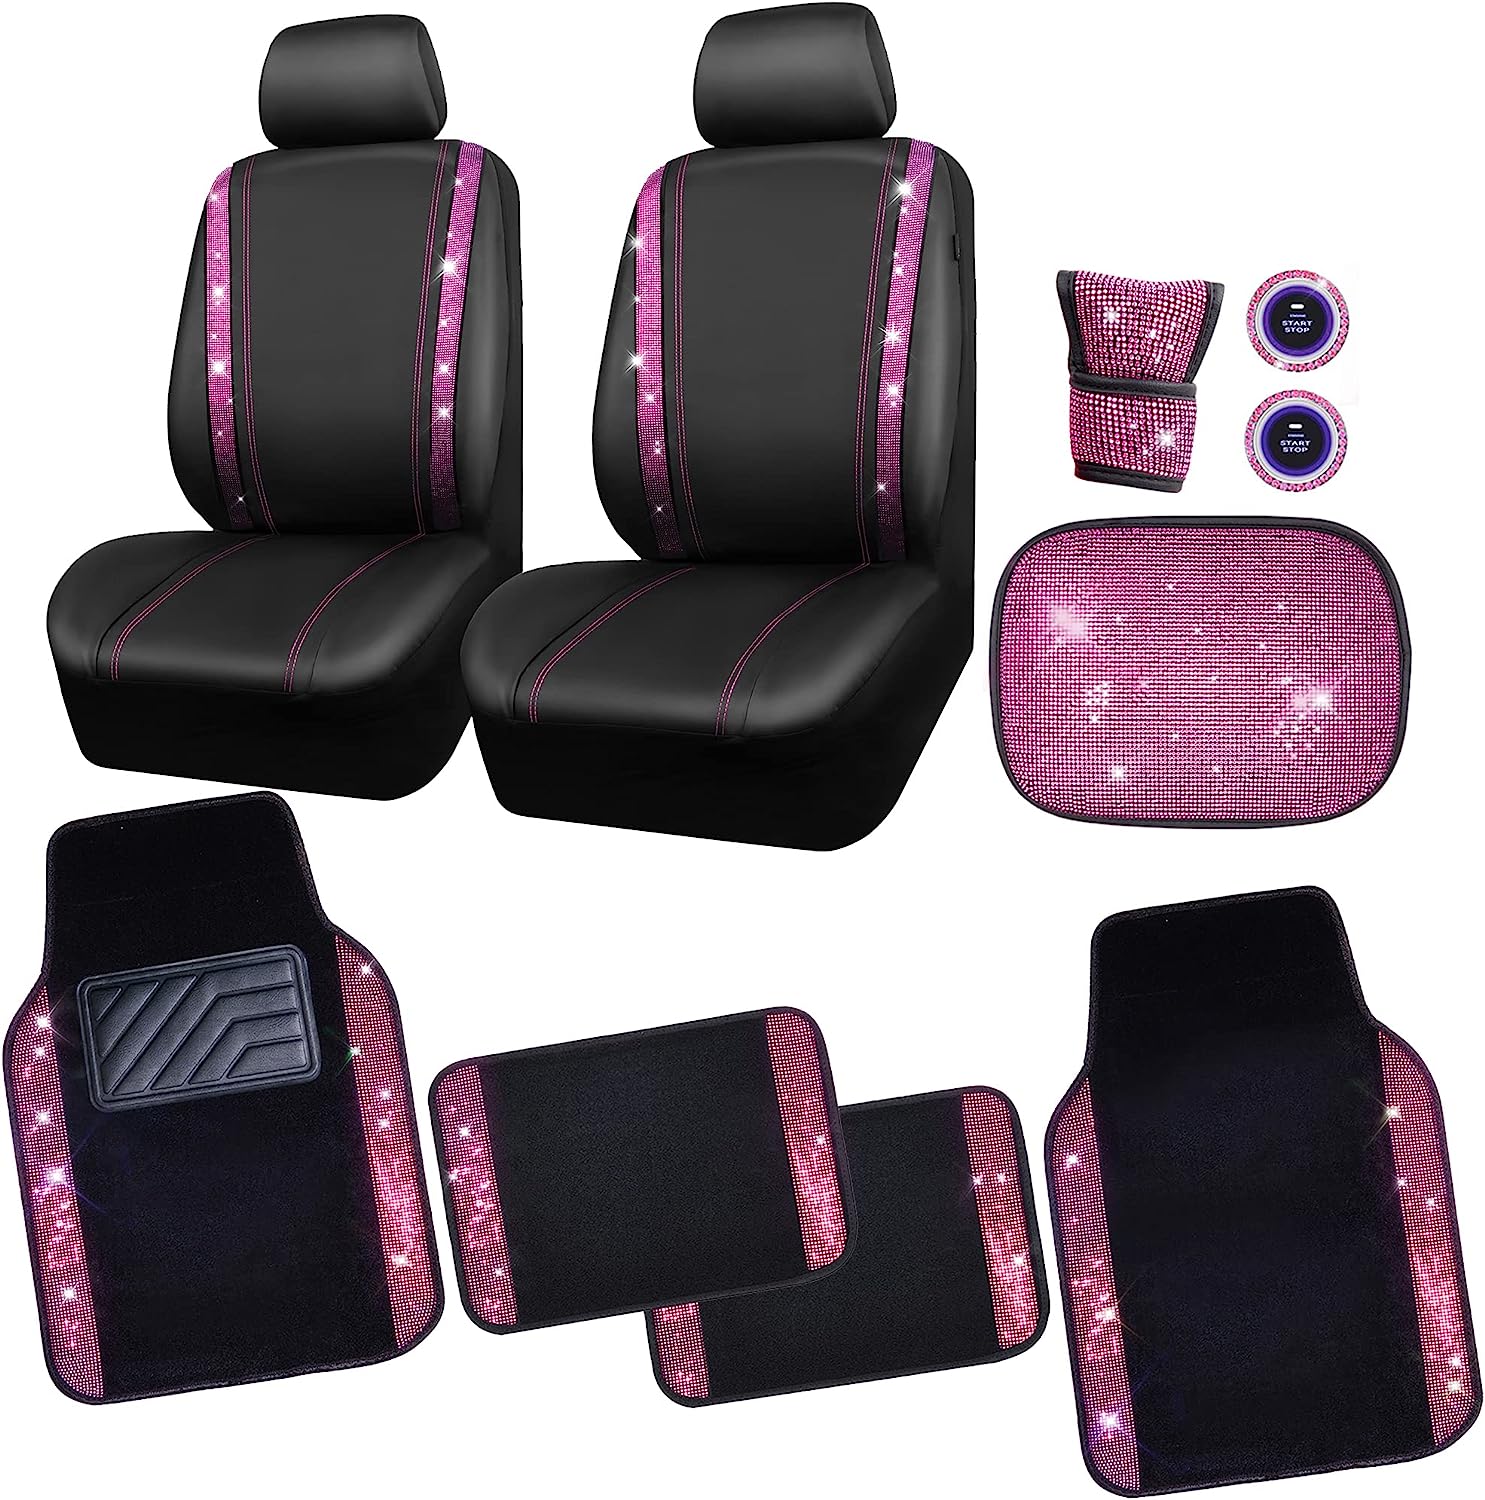 CAR PASS® Rhinestone Bling Car Seat Covers Leather &Shining Diamond Floor mats Carpet Waterproof Anti-Slip Nibs& Bling Accessories Interior Sets for Women Silver Glitter White Crystal Sparkly